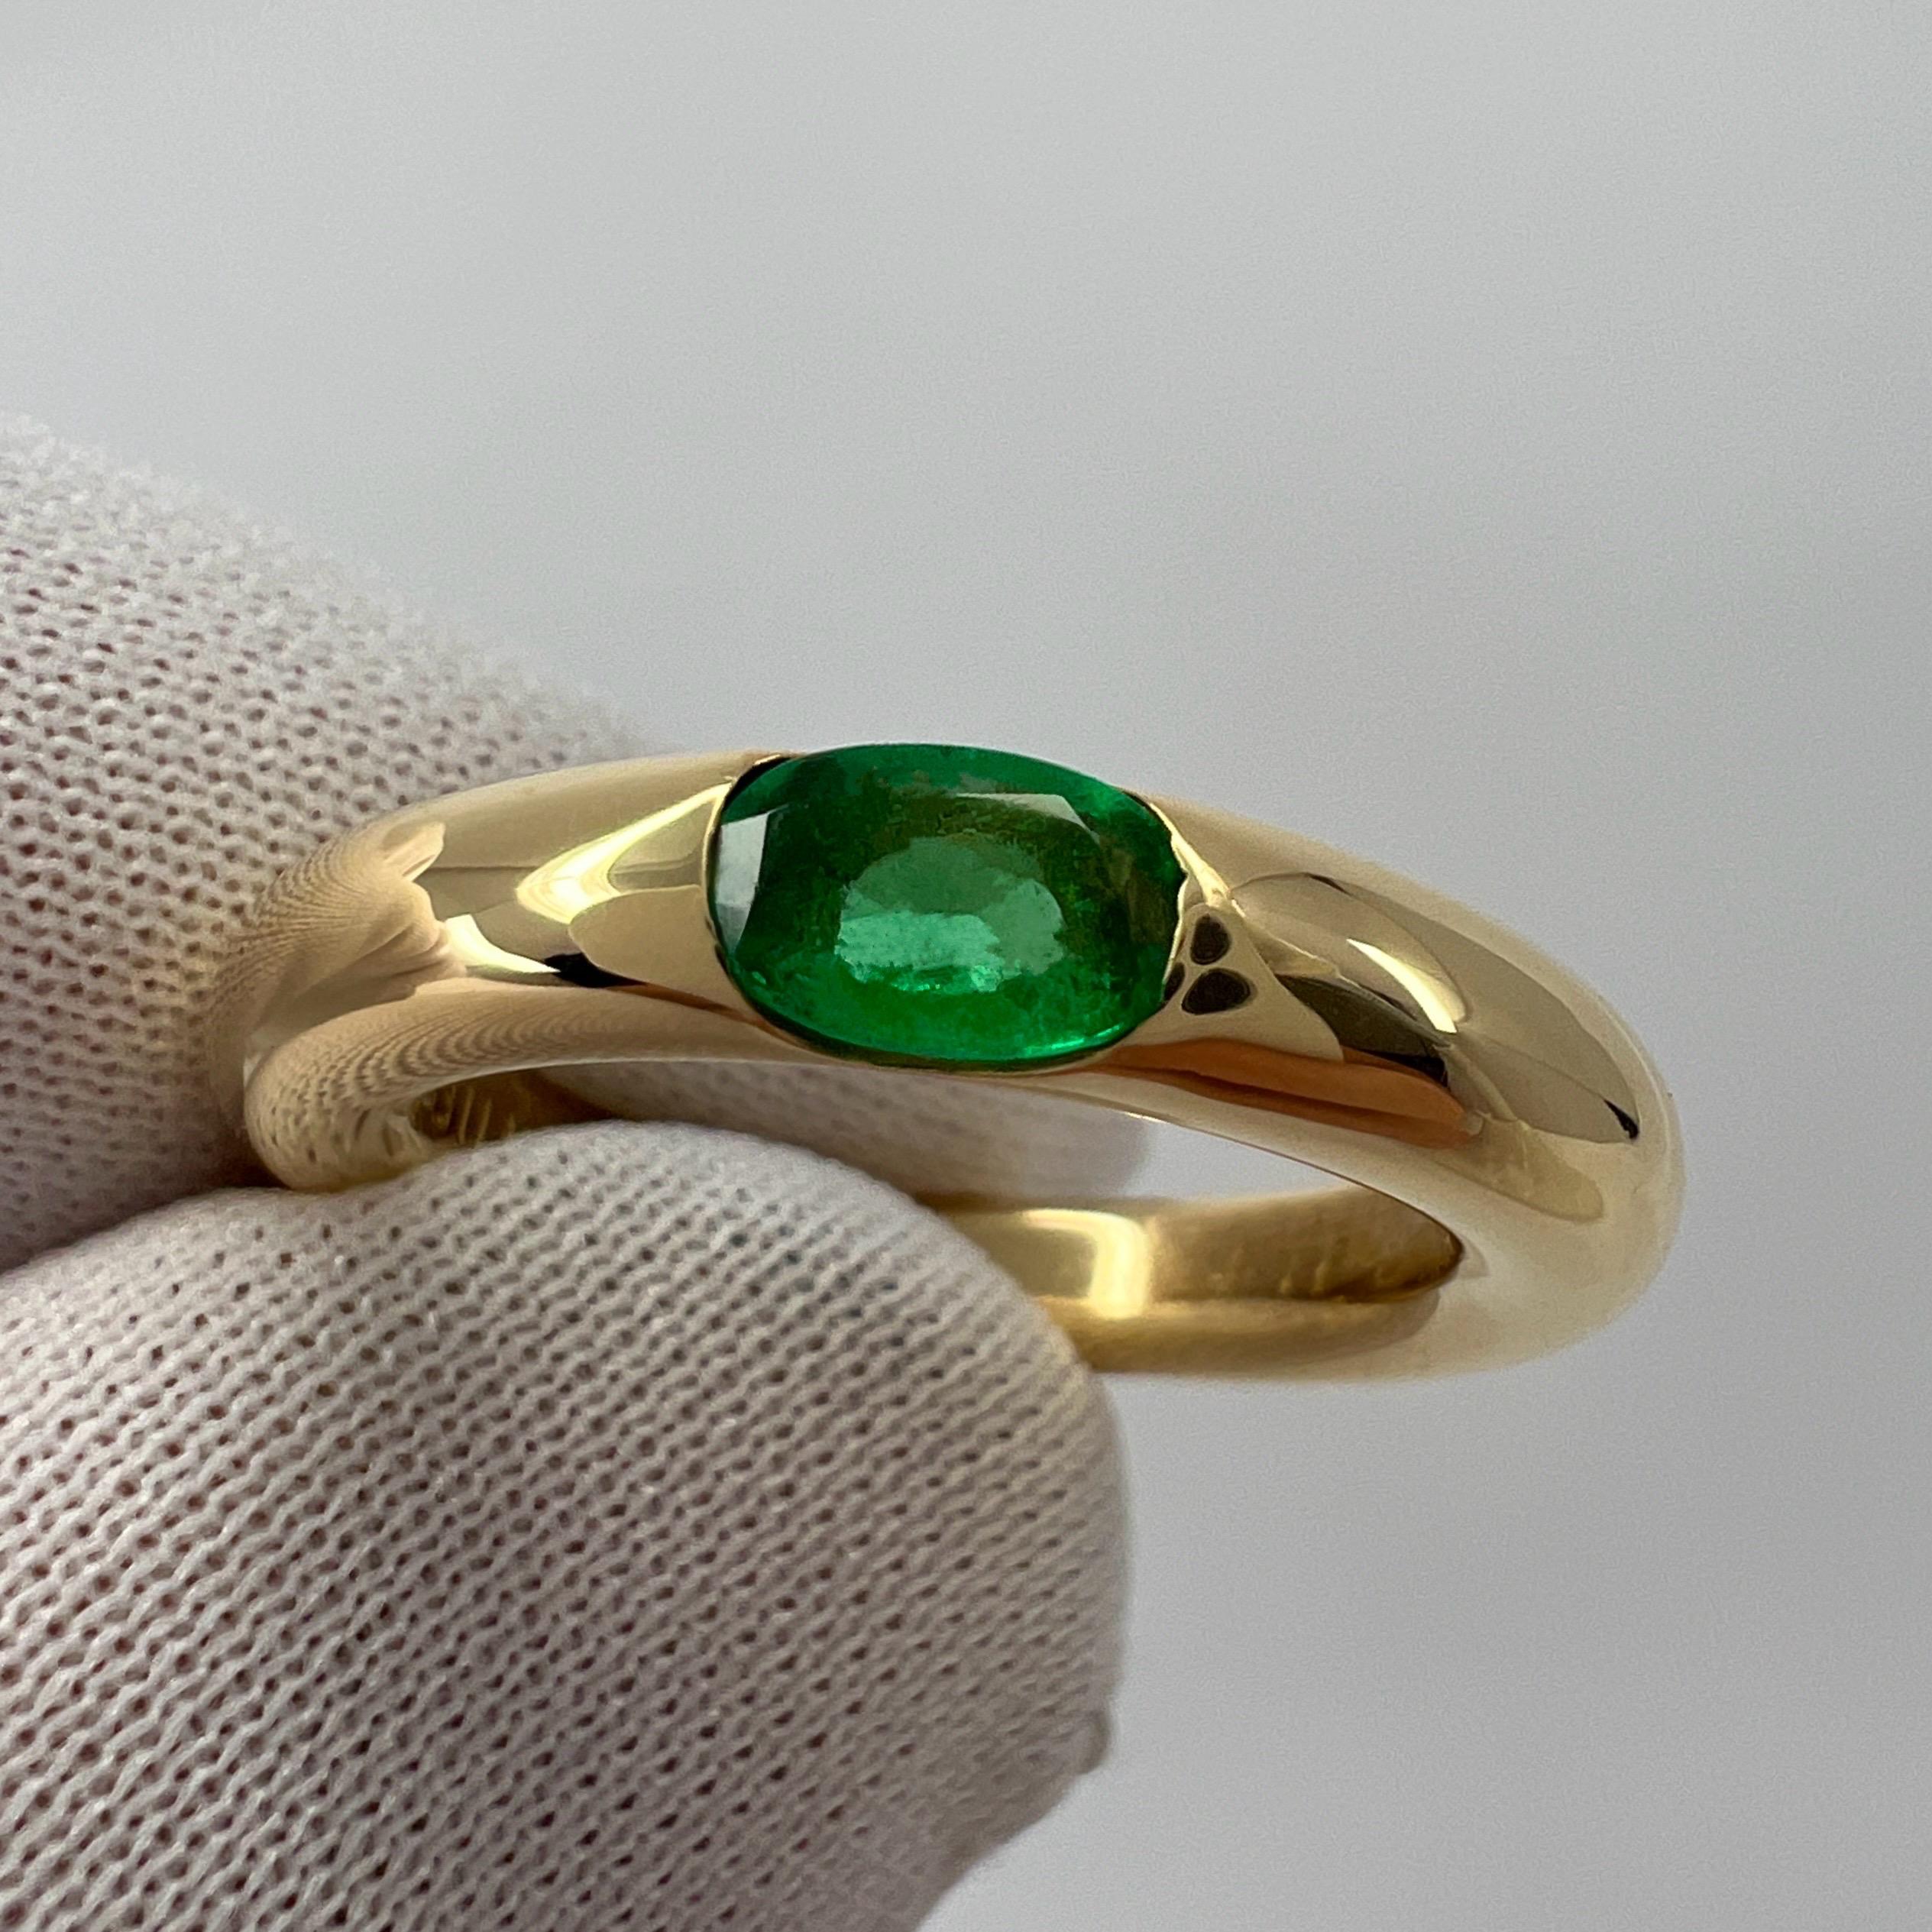 Vintage Cartier Emerald Vivid Green Ellipse 18k Yellow Gold Solitaire Ring 52 For Sale 6